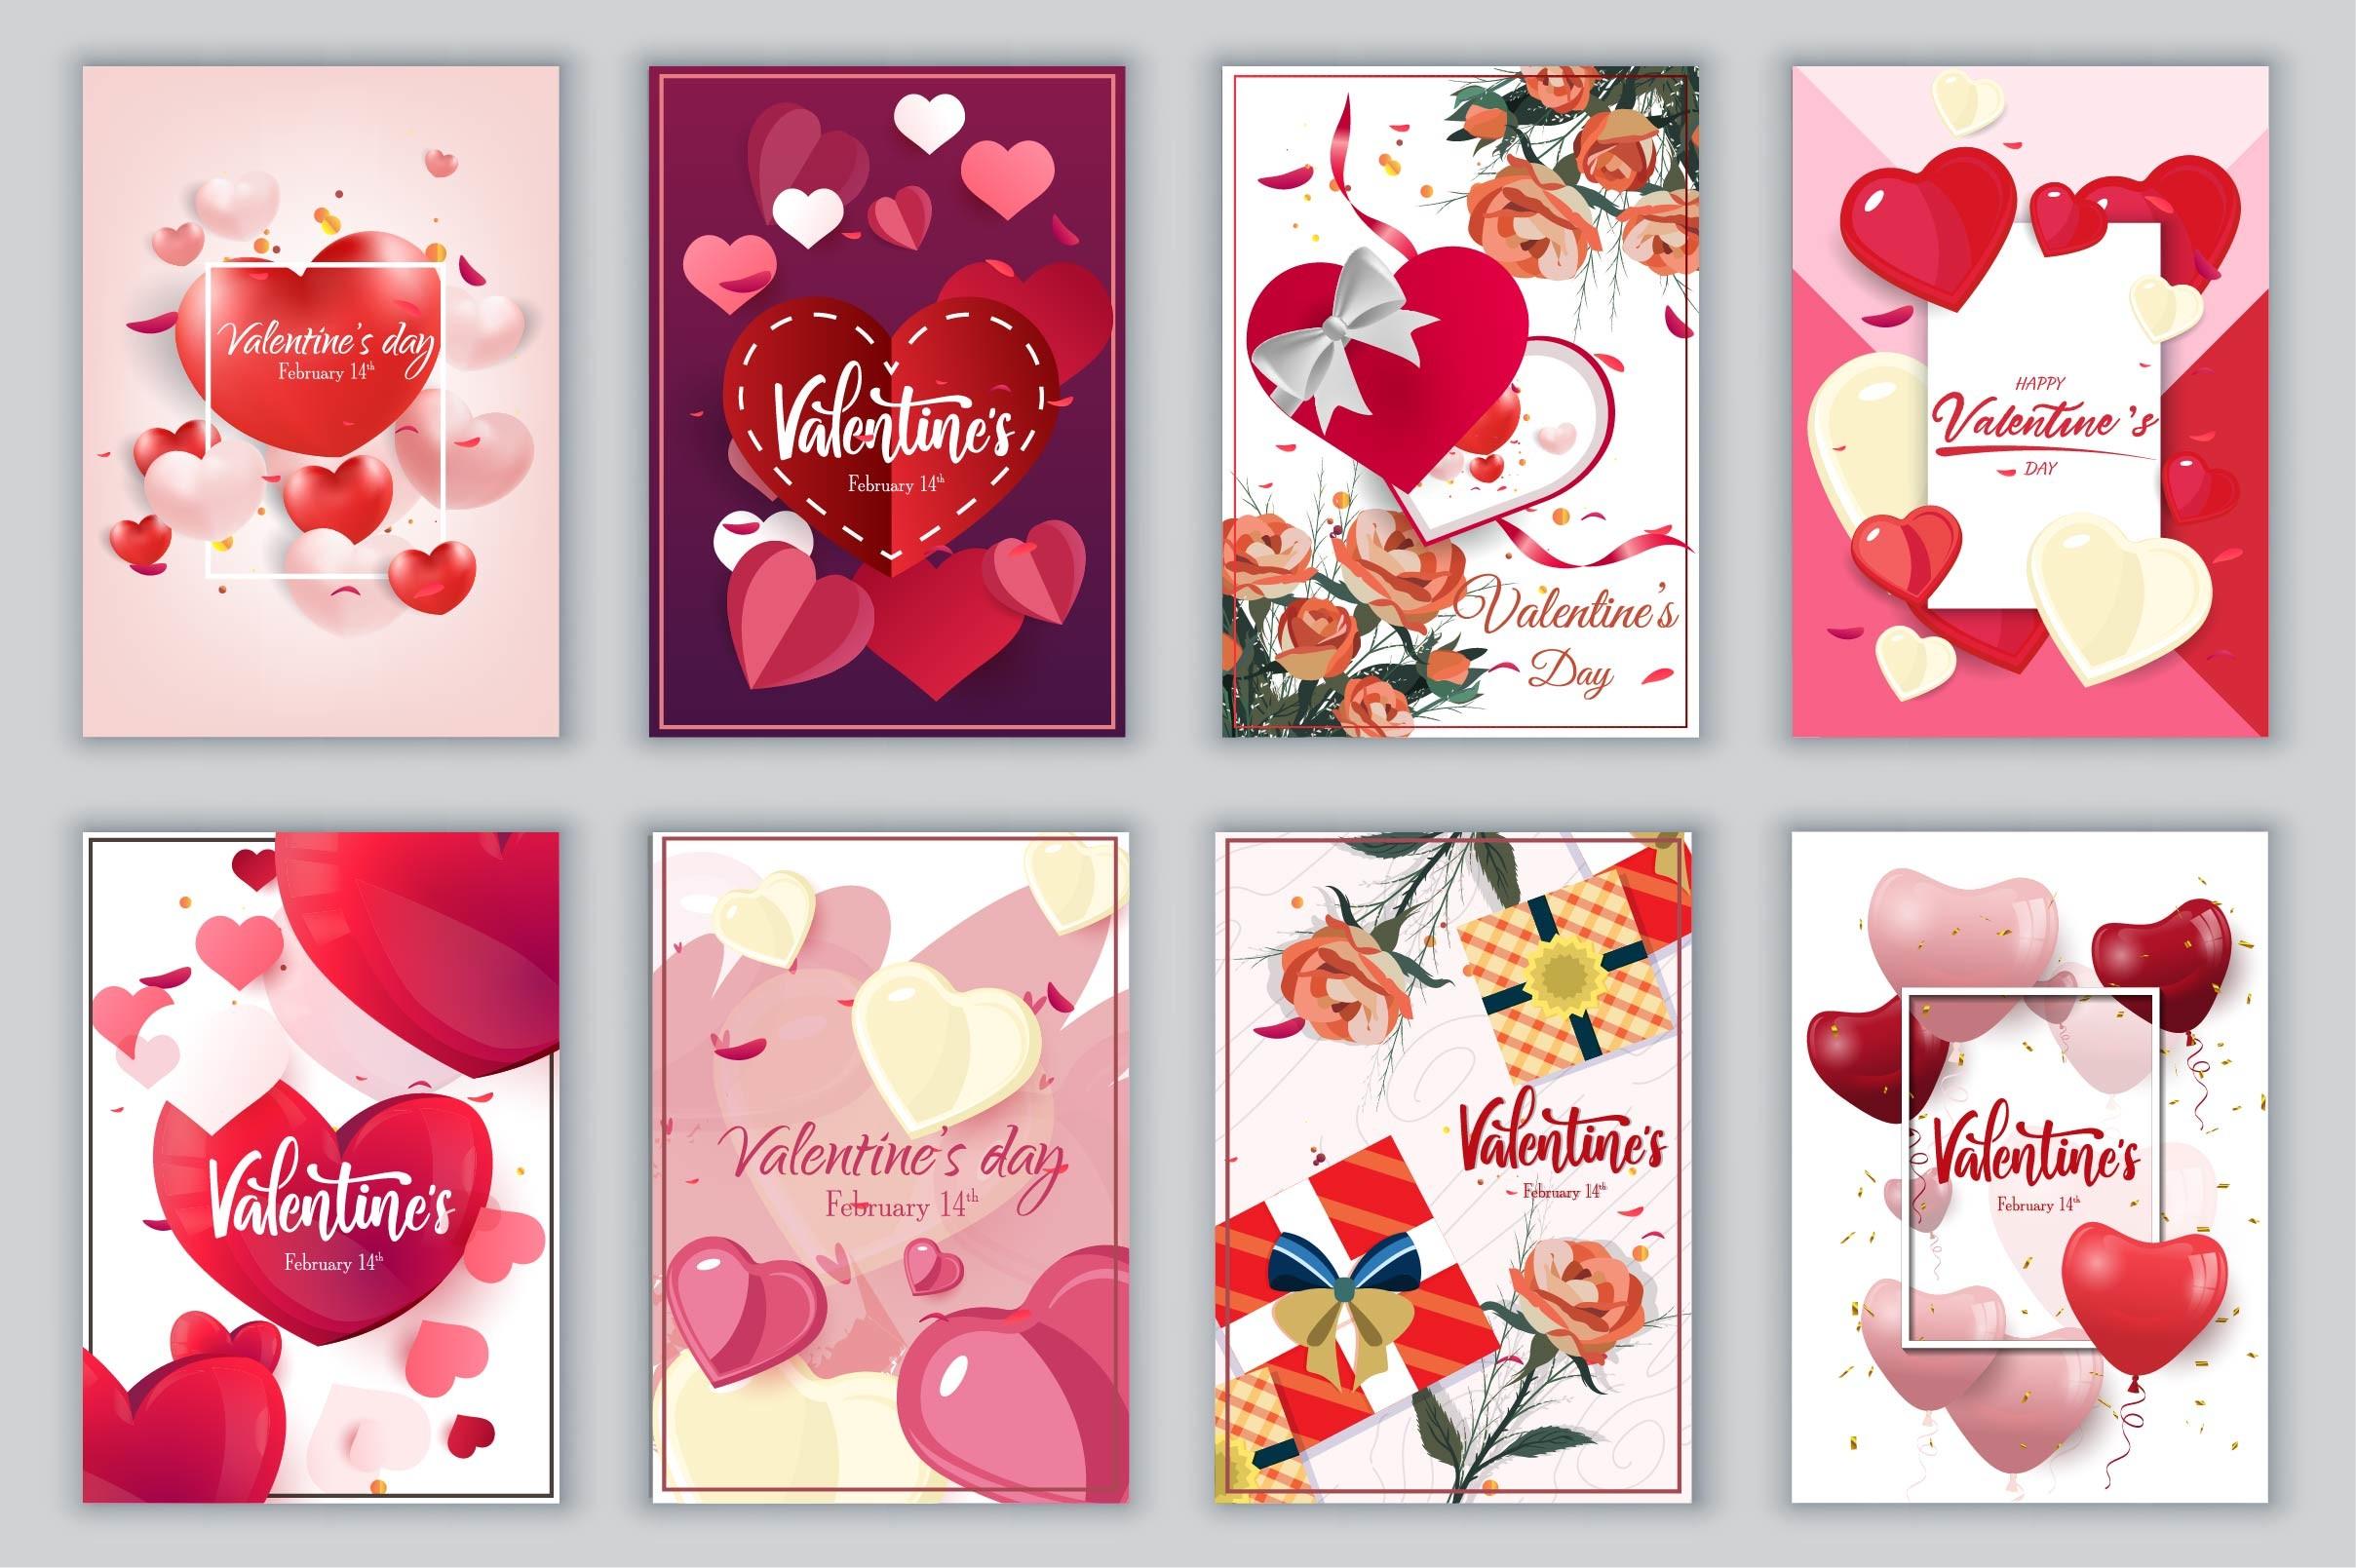 Valentines Cards Background Templates